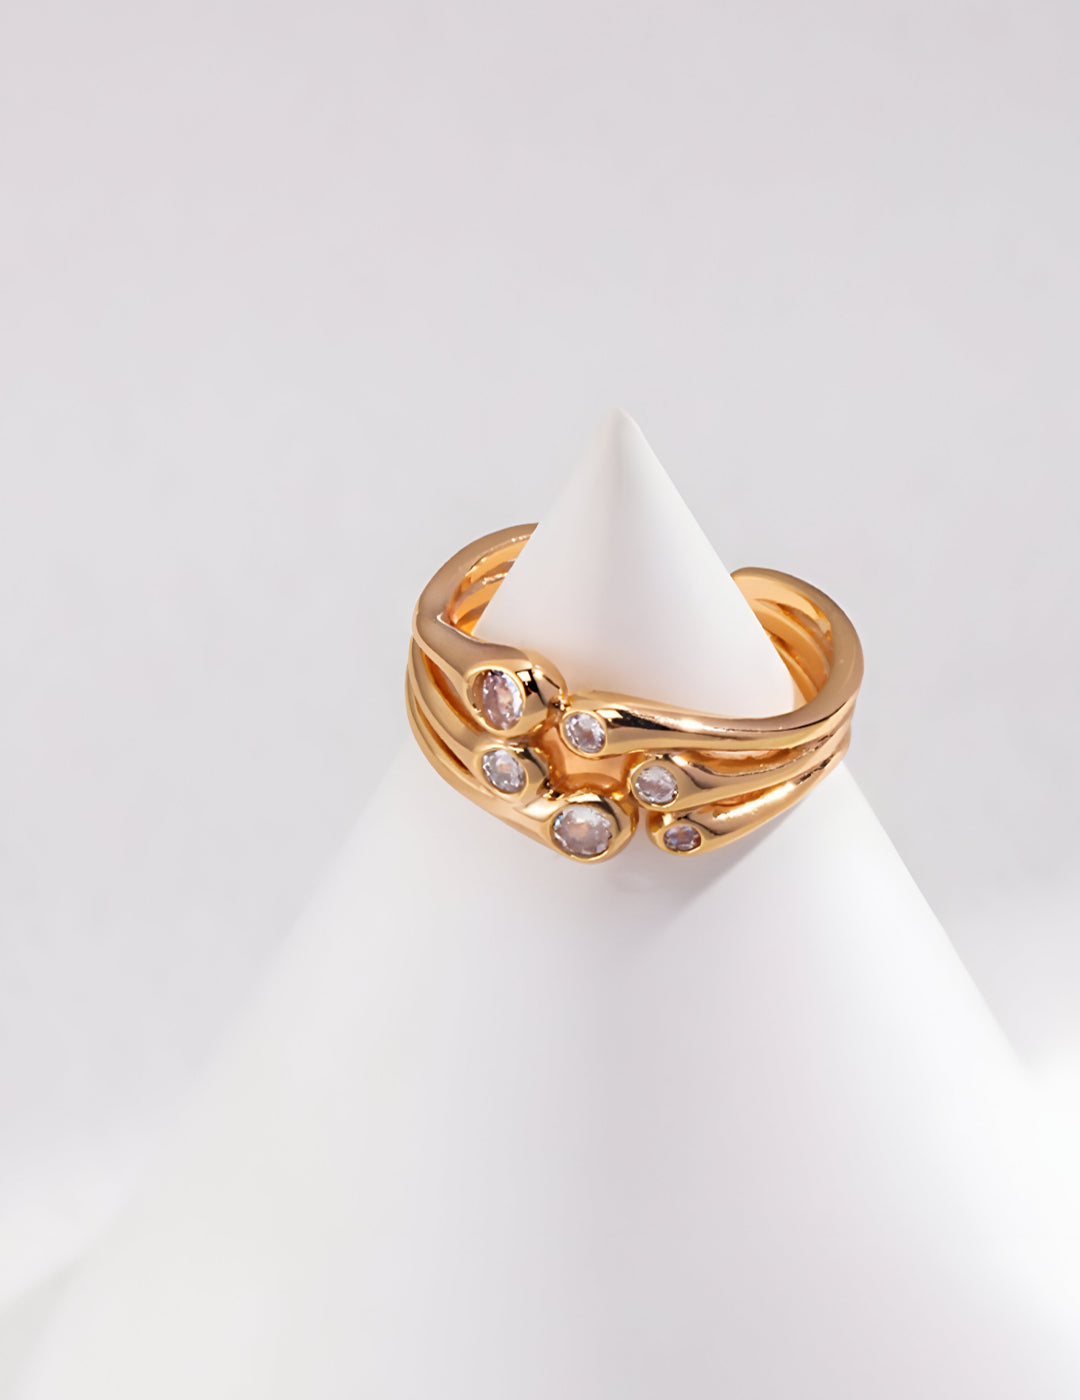 Gold and Silver Ring - Embedded with Shining Sparkling Zircon - S925 Sterling Silver with 18K Gold Vermeil  - Embrace your Inner Glamorous and Brilliance